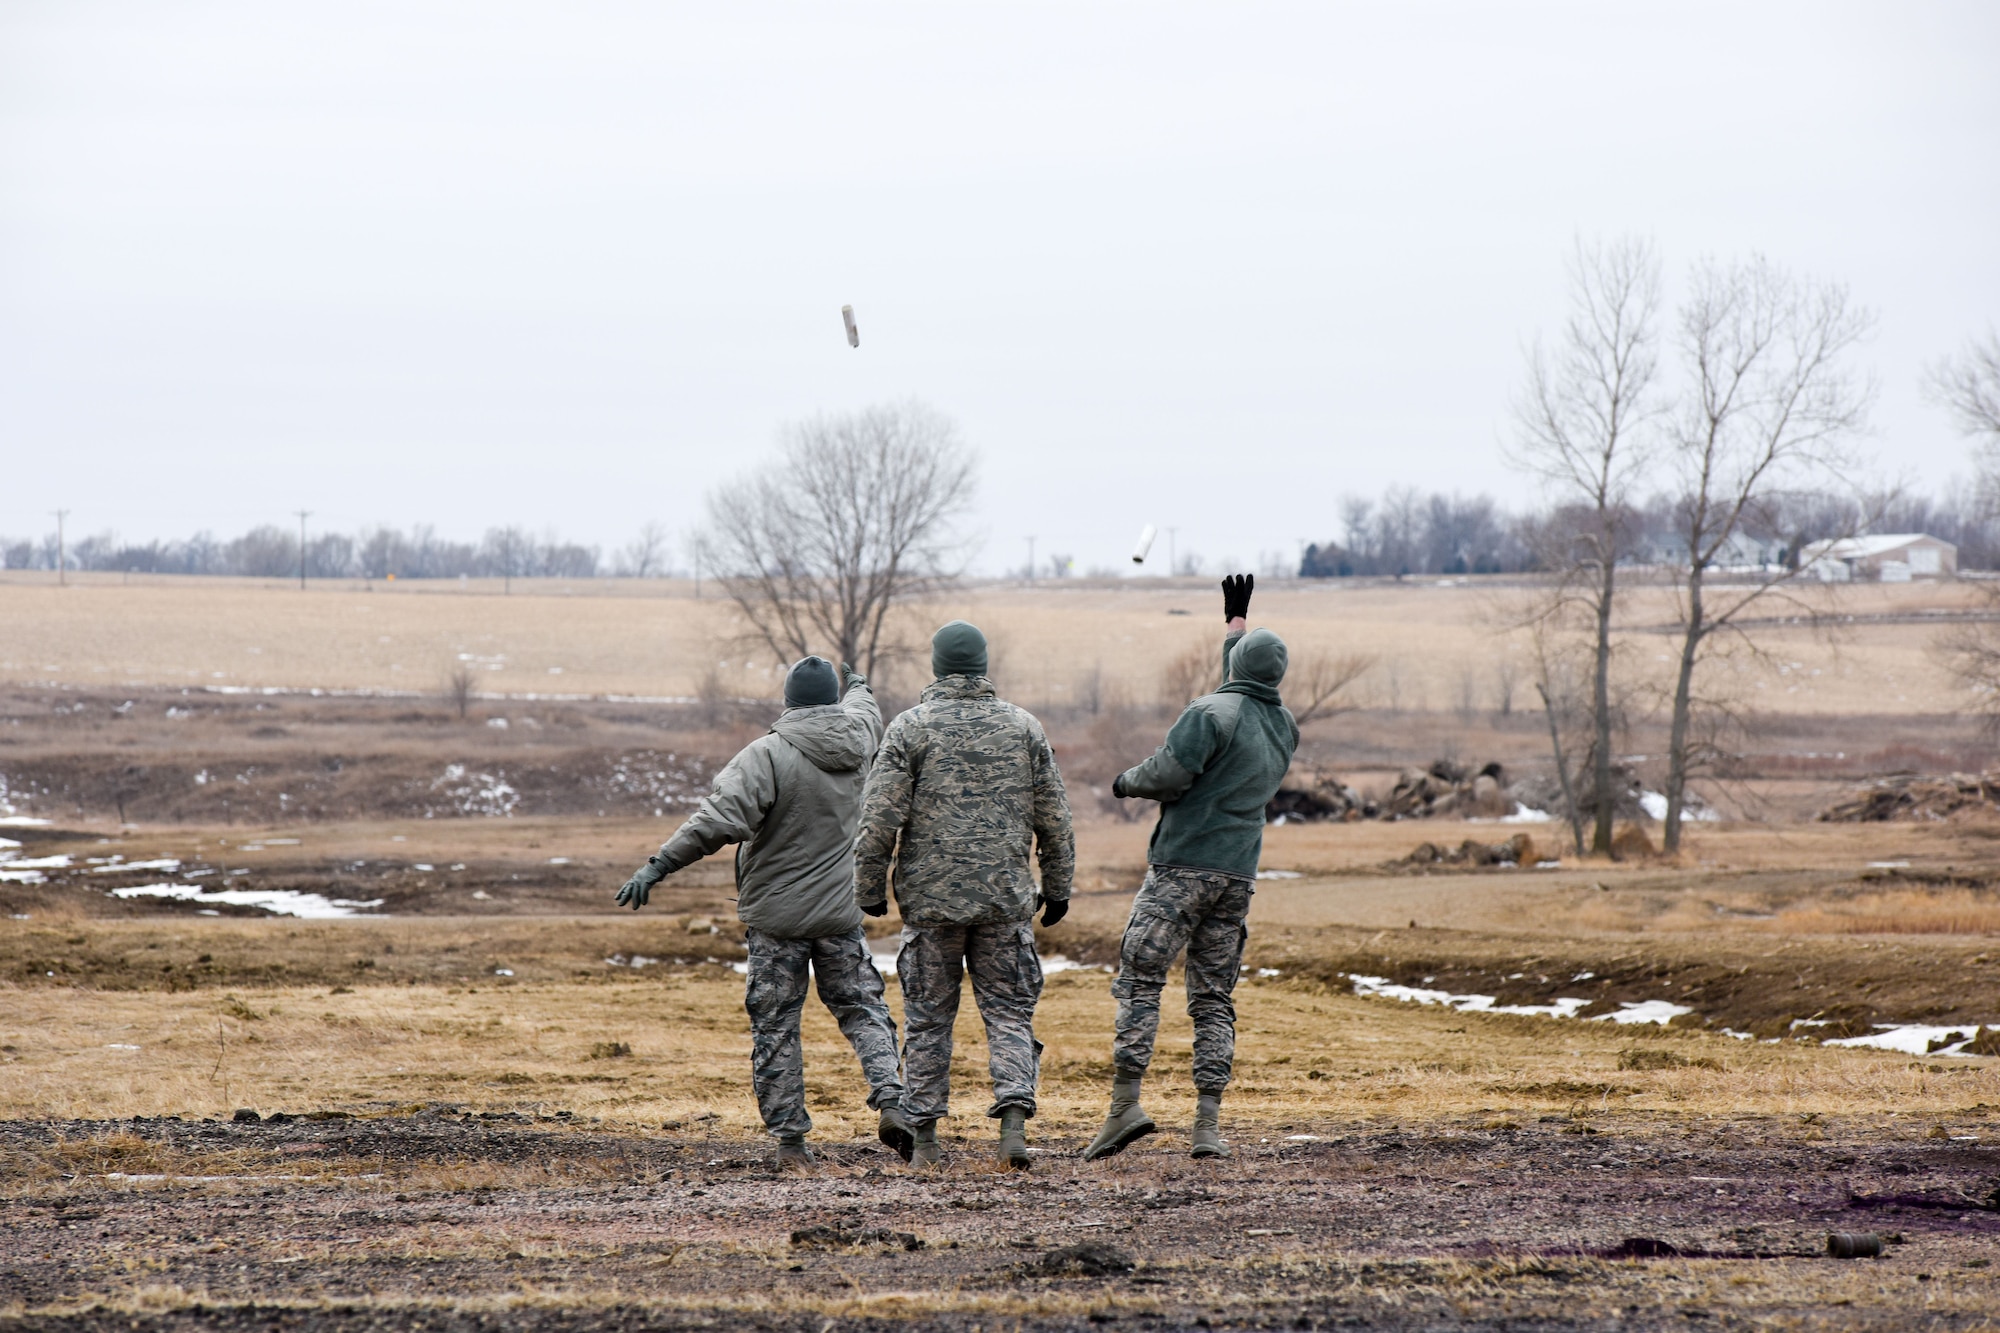 114th Security Forces Squadron members deploy ground burst simulators during training at a range near Joe Foss Field, S.D. Feb. 3, 2018.